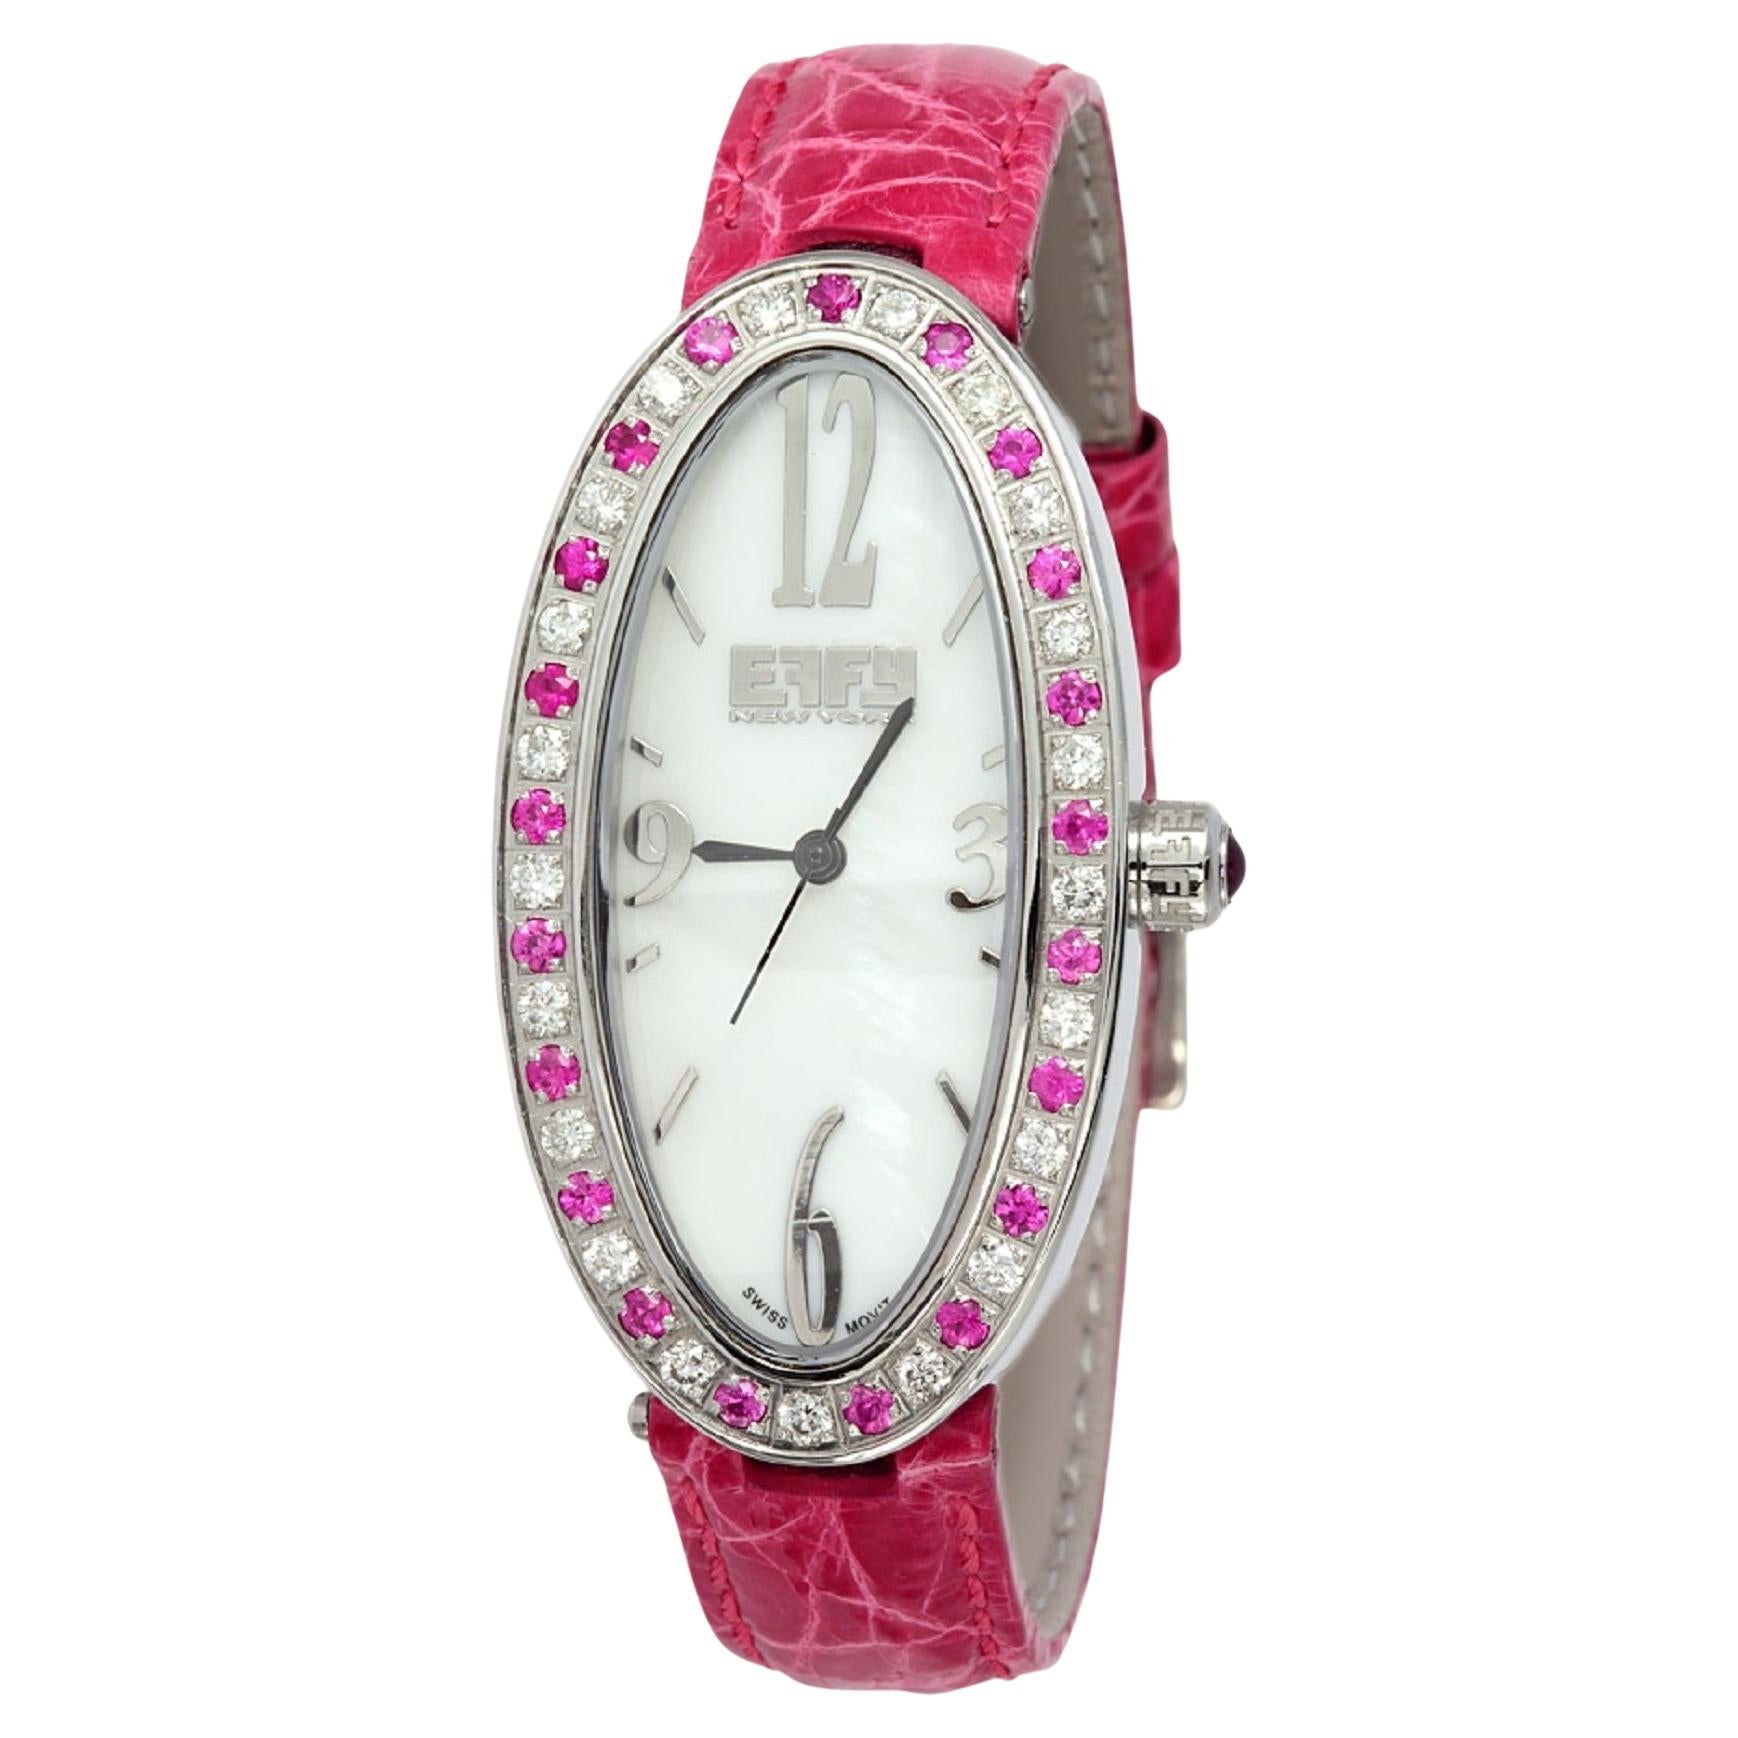 Pink Sapphire Diamonds Pave Dial Luxury Swiss Quartz Exotic Leather Band Watch For Sale